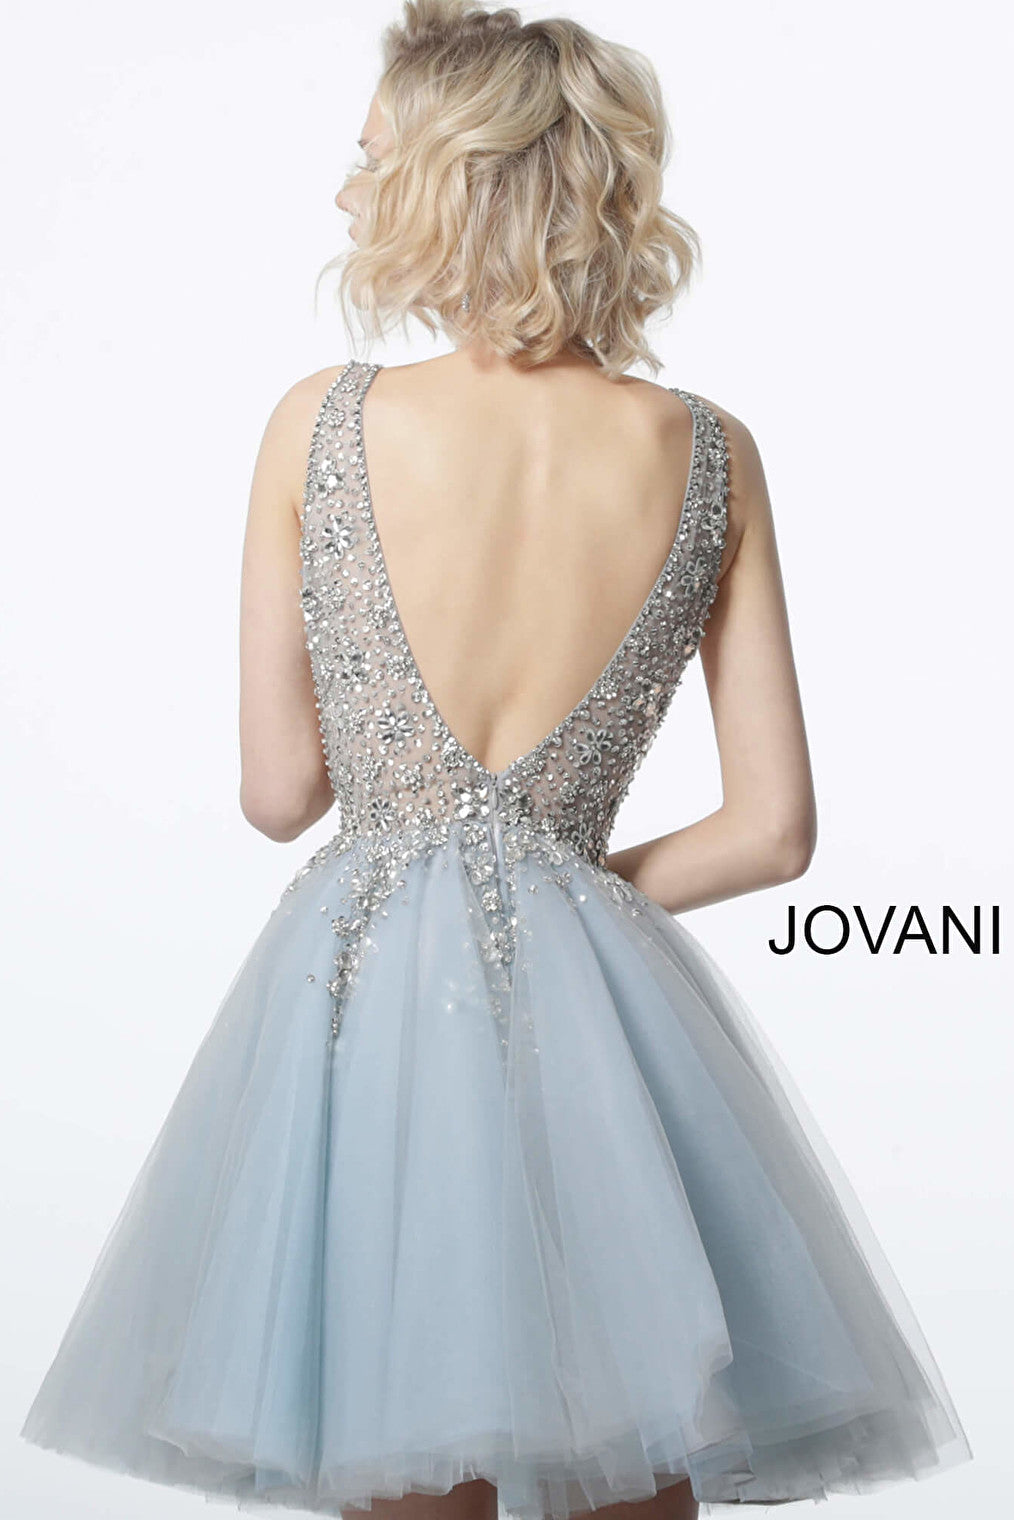 Jovani light blue beaded fit and flare cocktail dress 1774